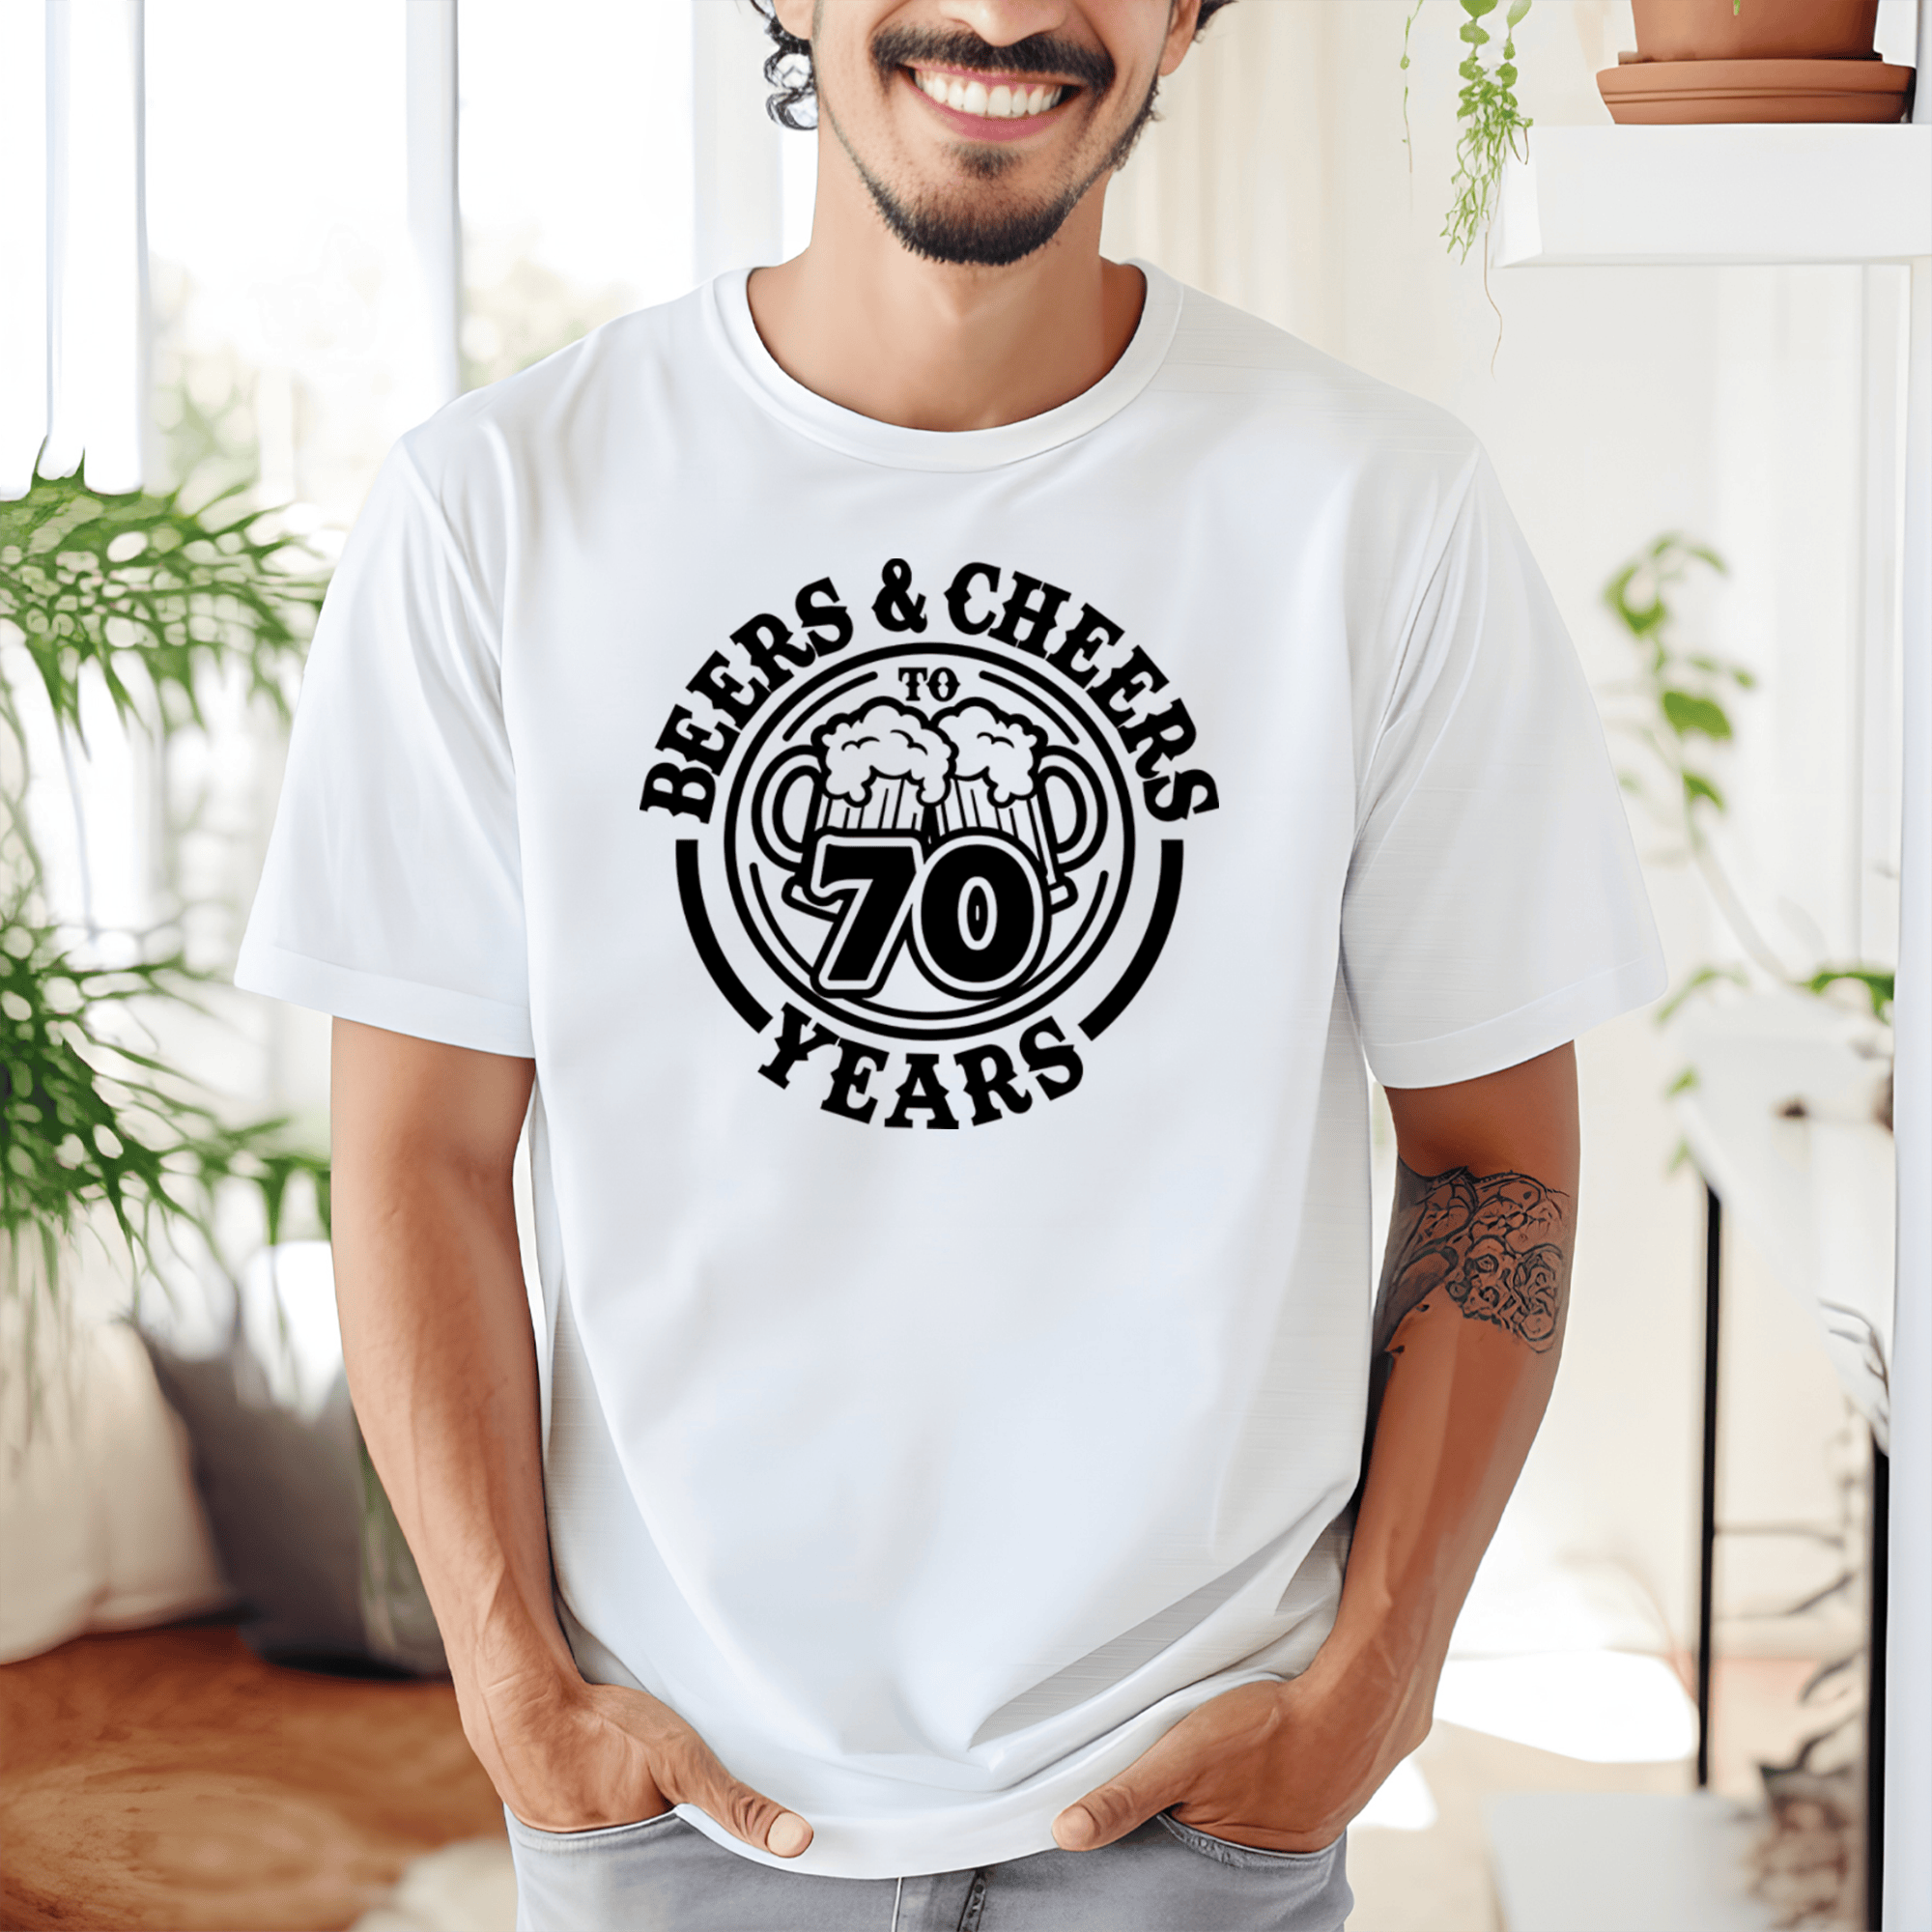 Mens White T Shirt with Beers-N-Cheers-70 design